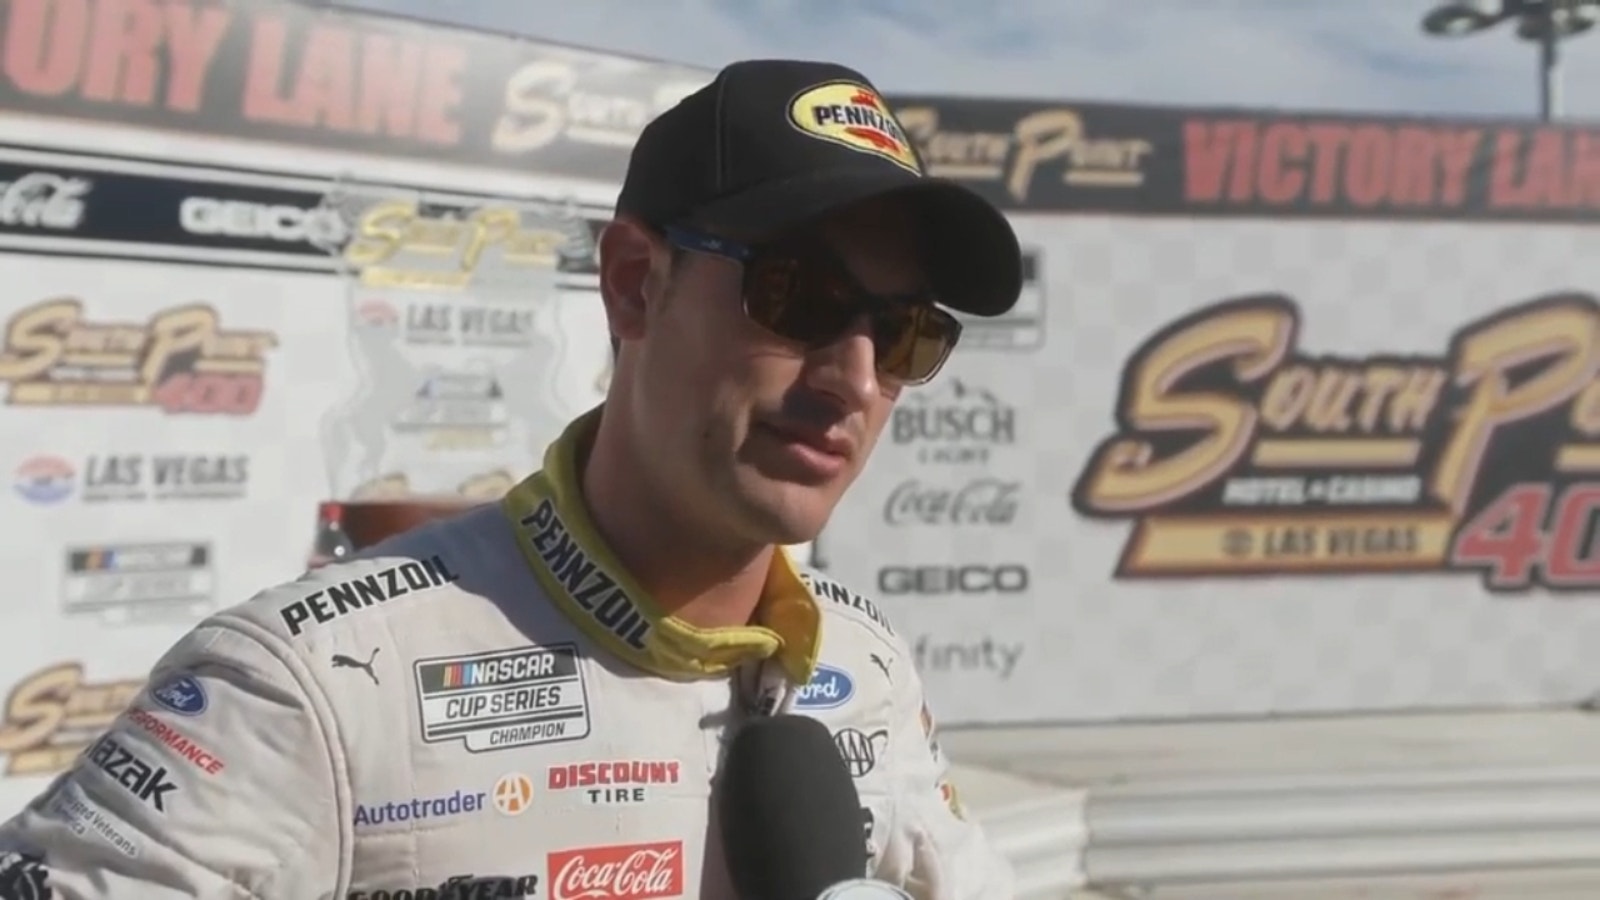 Joey Logano on his late race strategy at Las Vegas